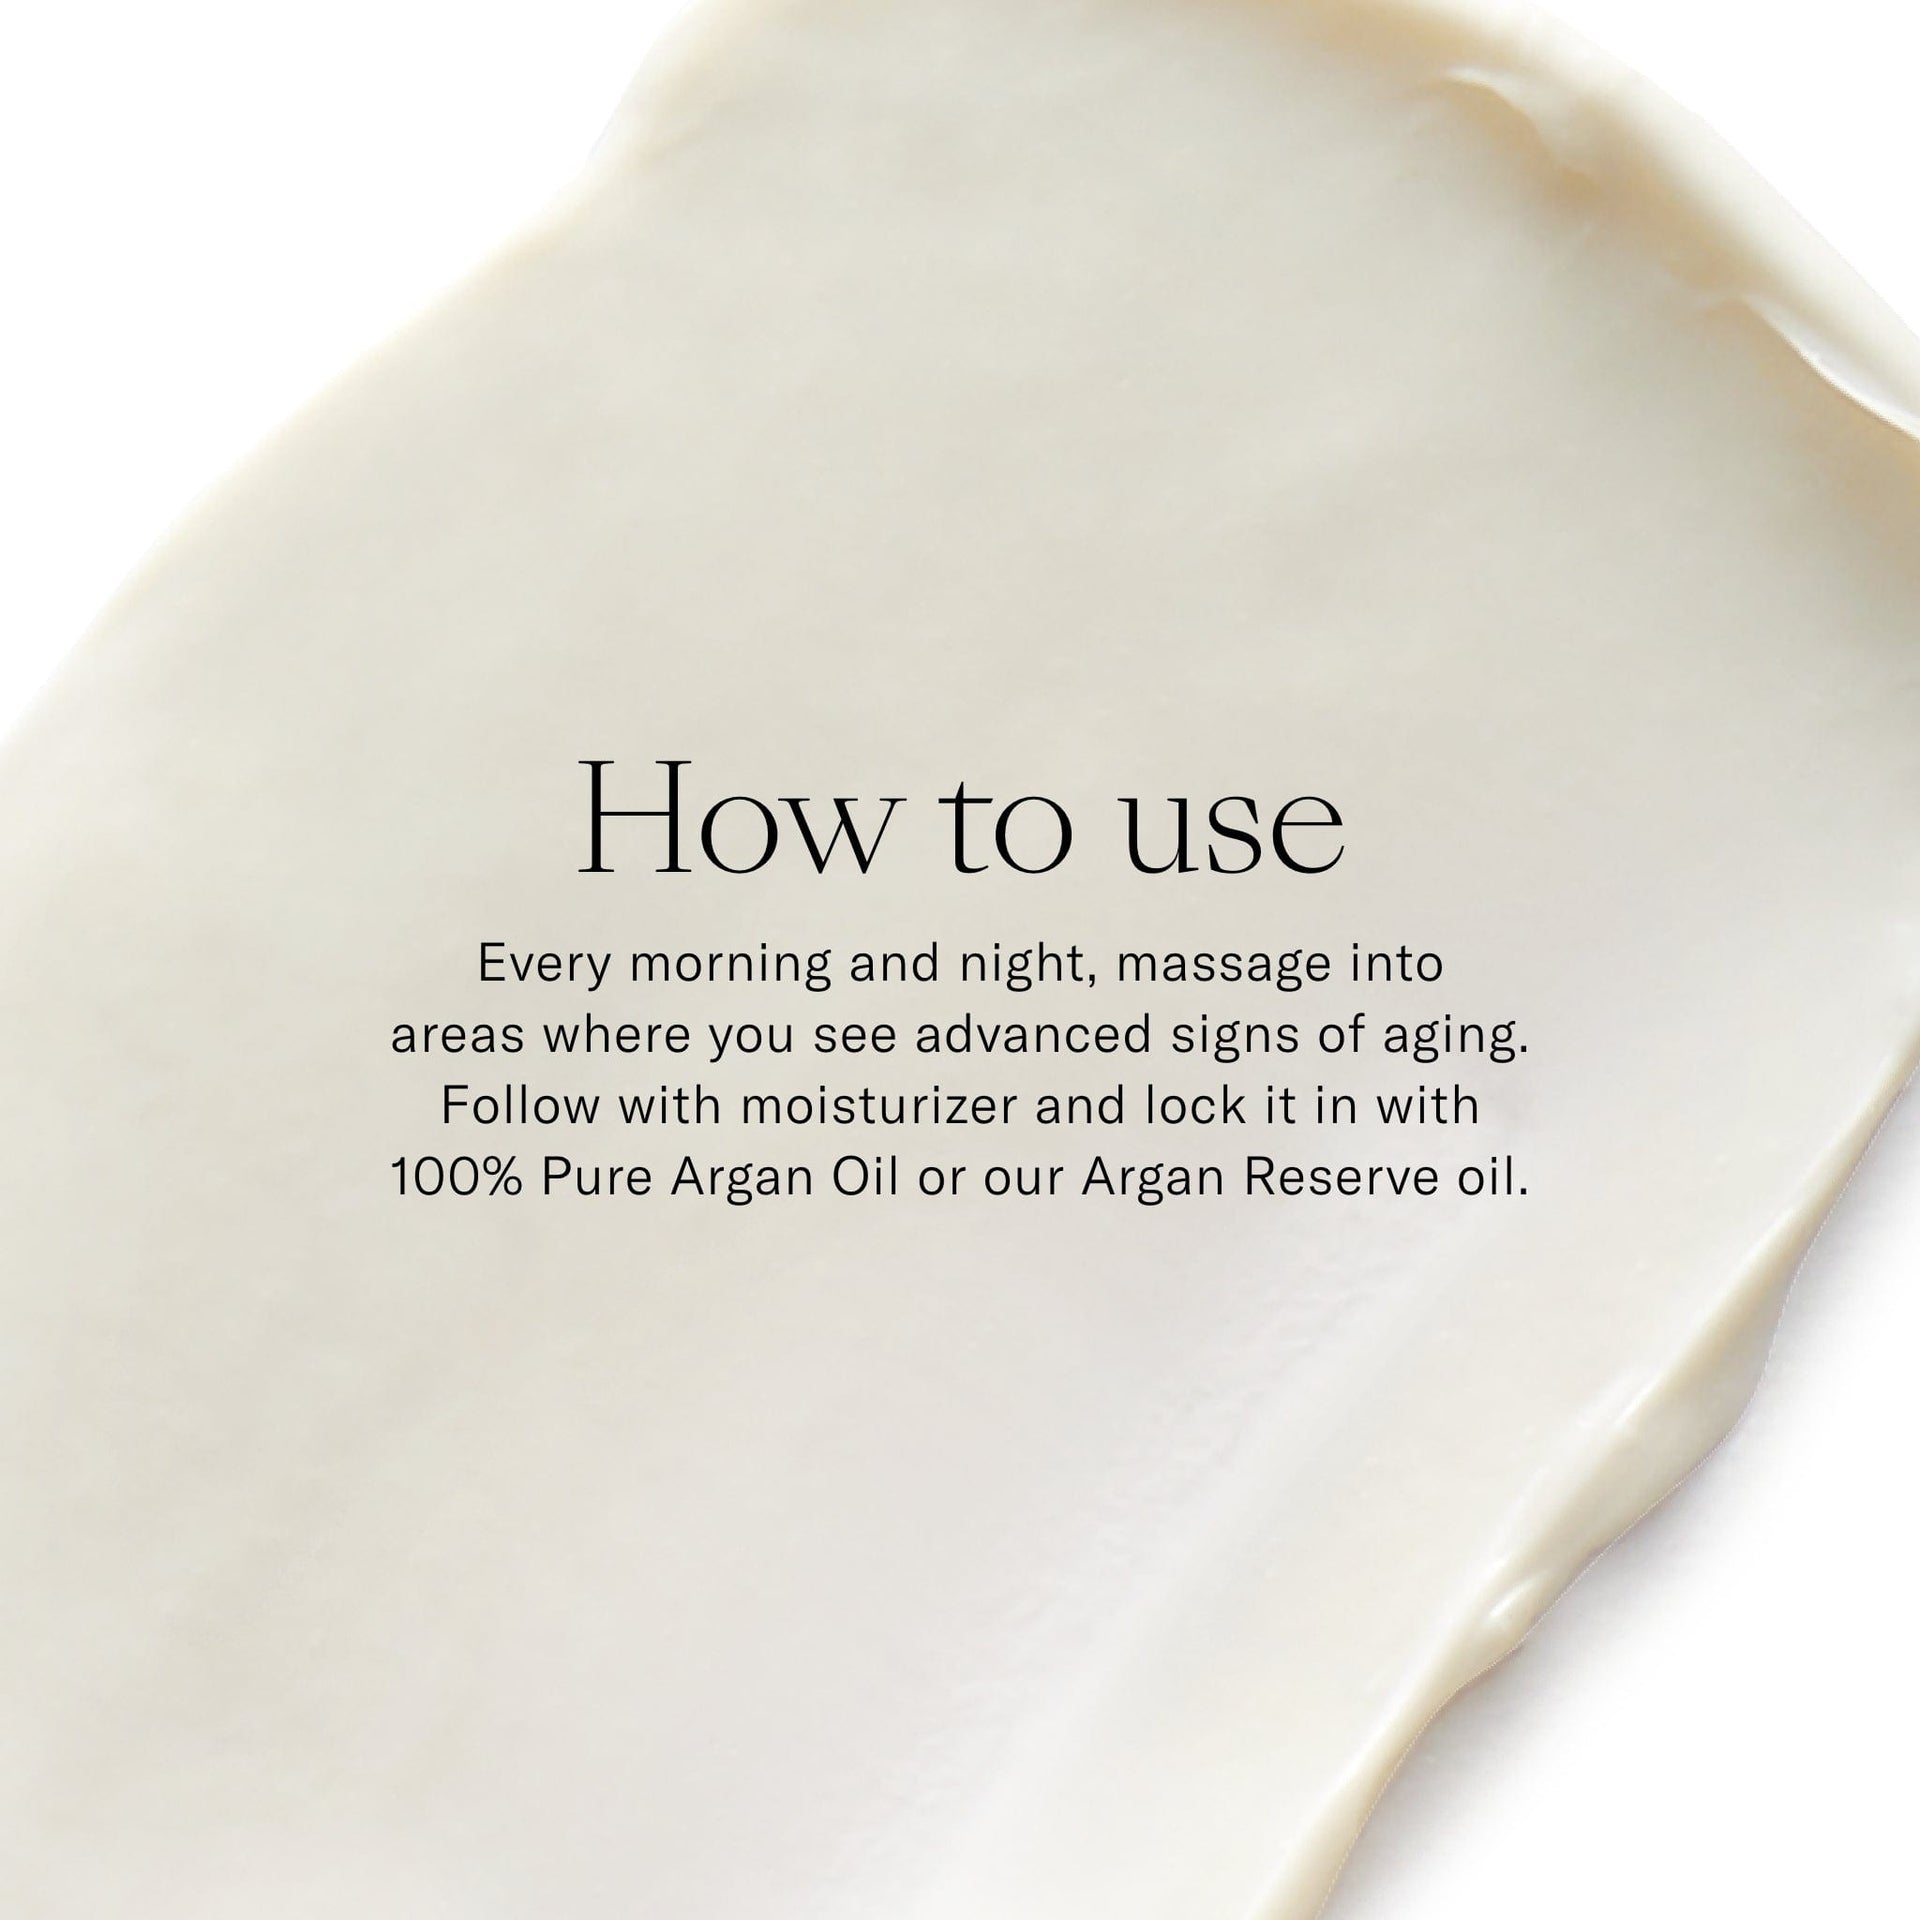 How to use. Every morning and night, massage into areas where you see advanced signs of aging.